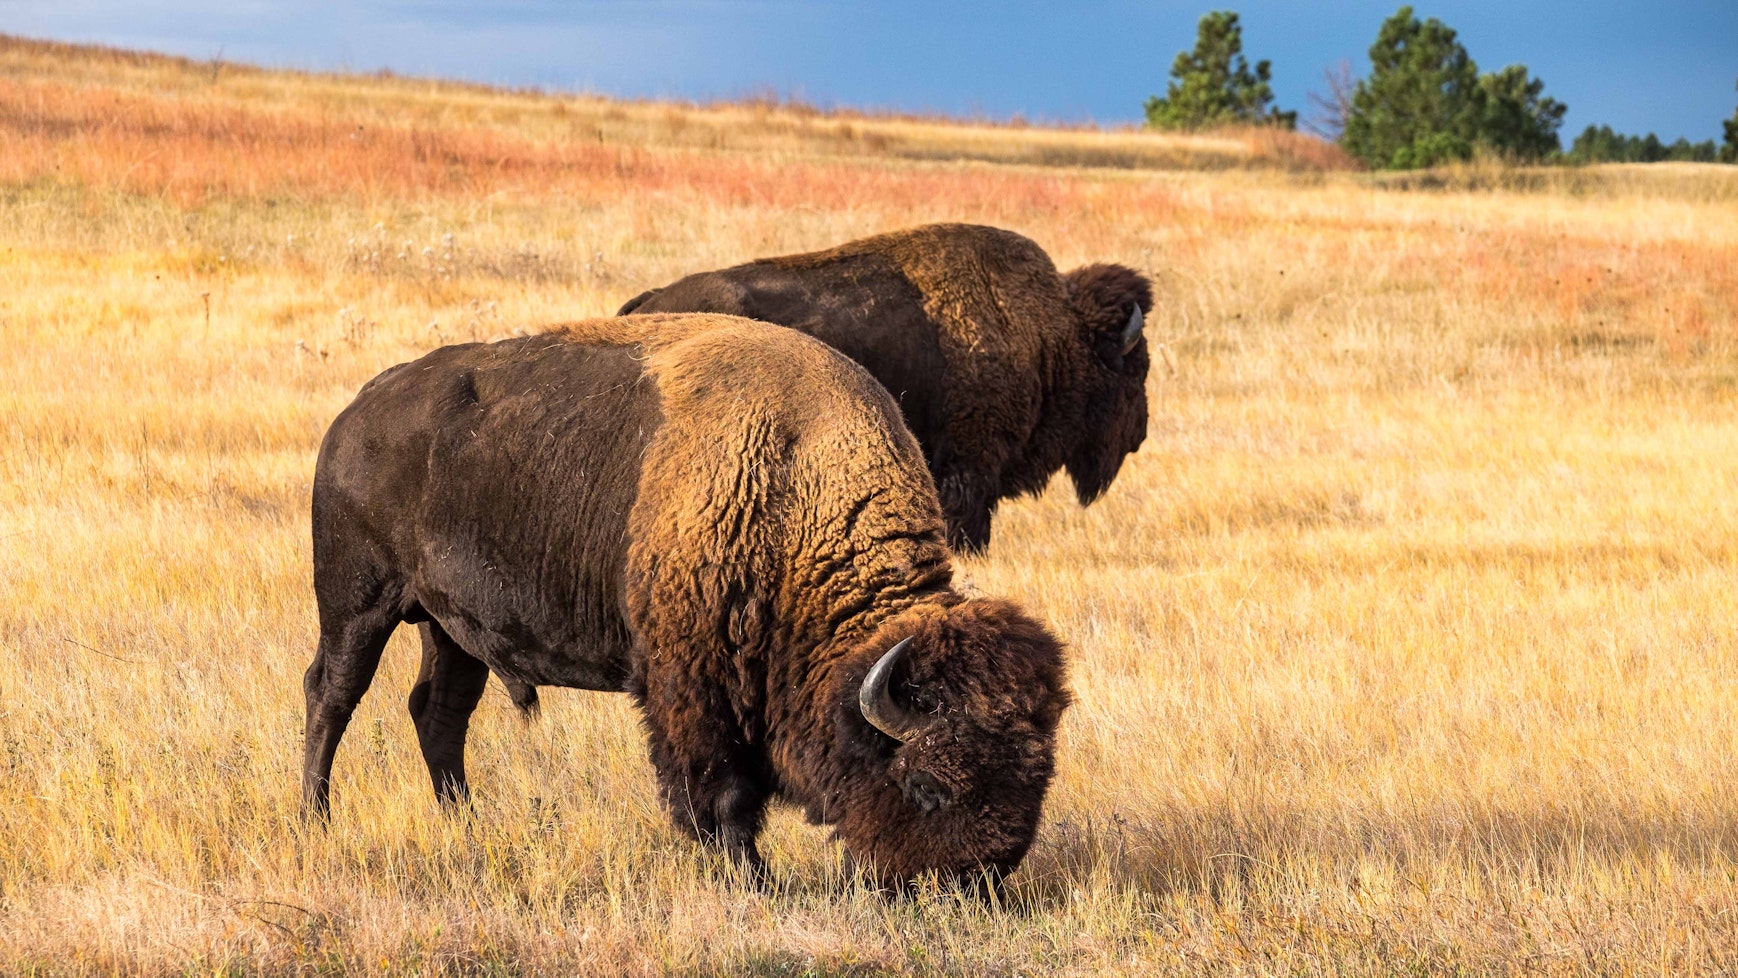 Two large bison graze in yellow-brown fields